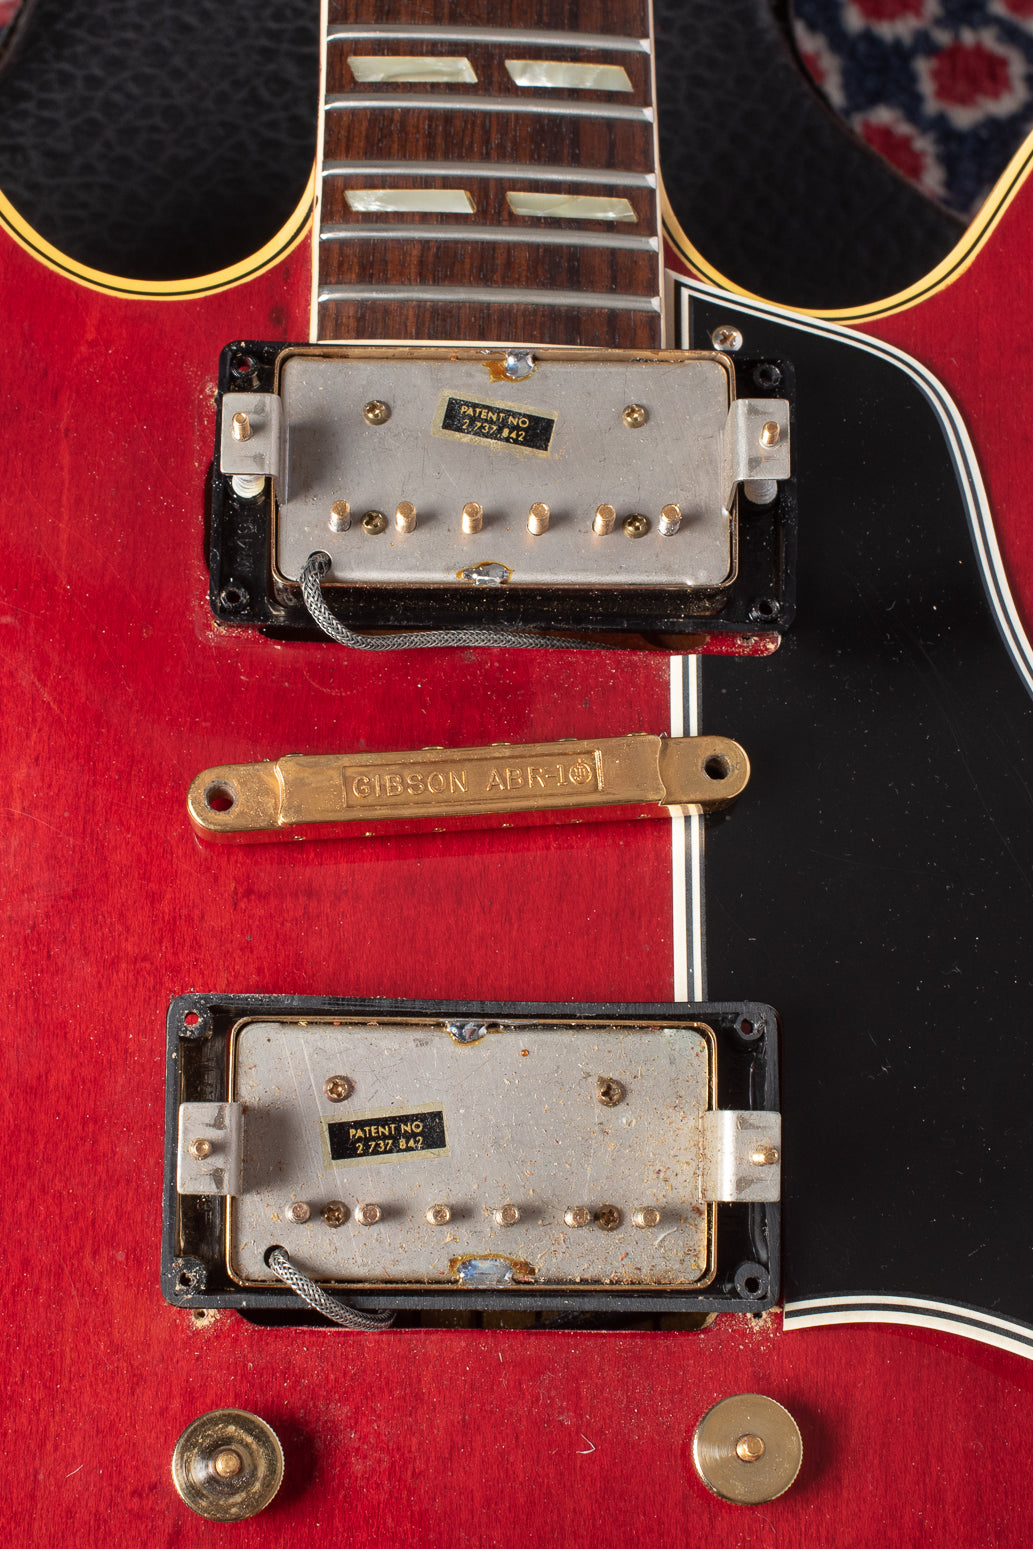 Patent number sticker humbucker pickups and gold ABR-1 bridge on Gibson ES-345 1966